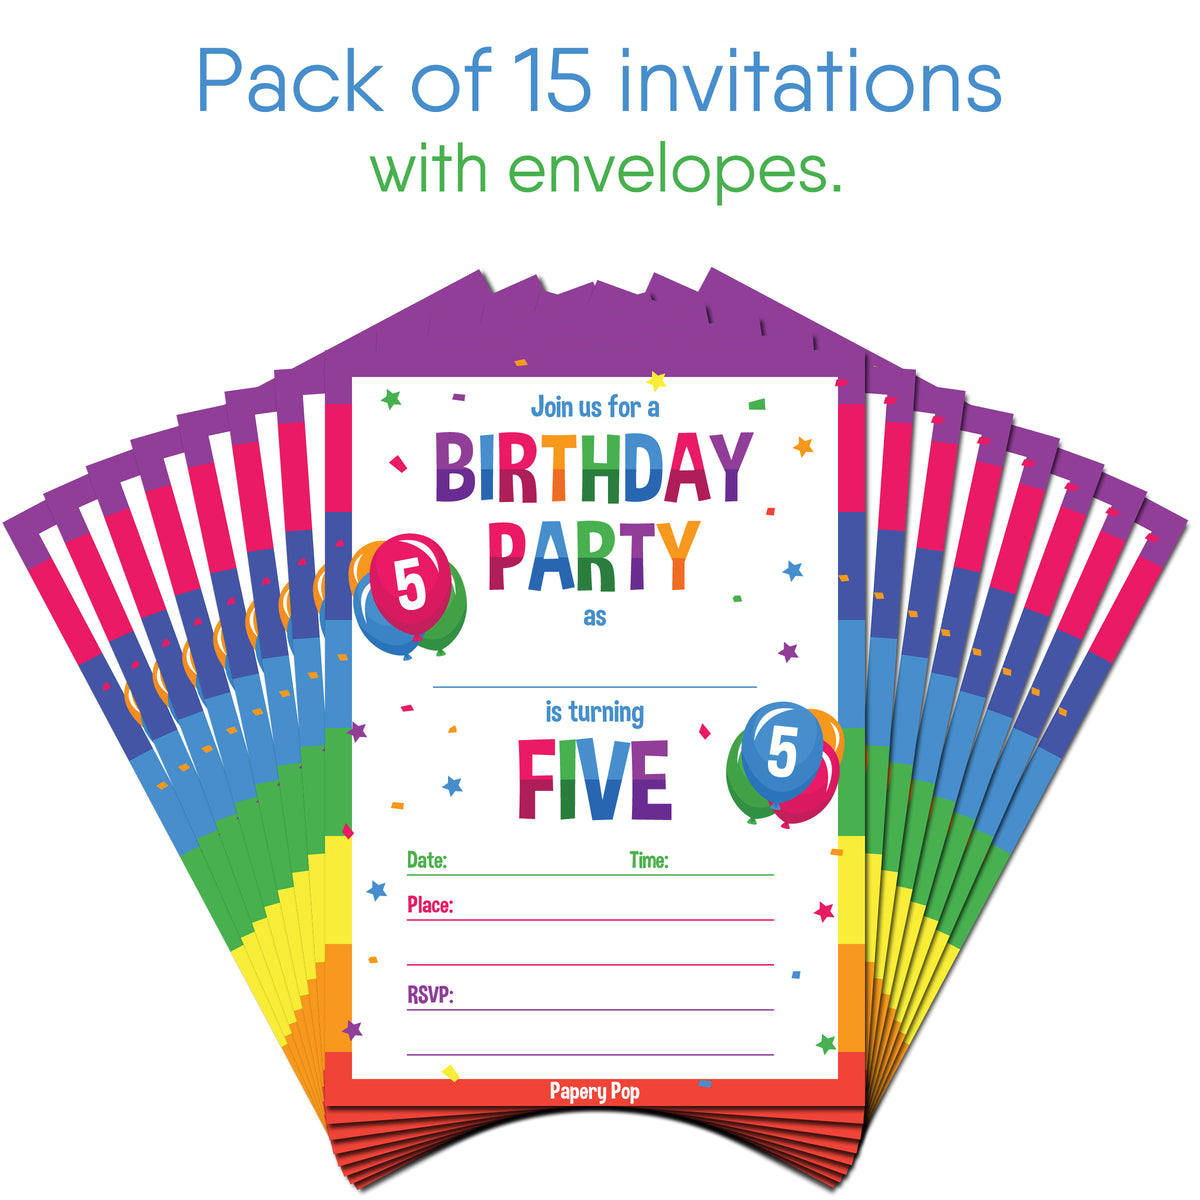 5-year-old-birthday-party-invitations-with-envelopes-15-count-kids